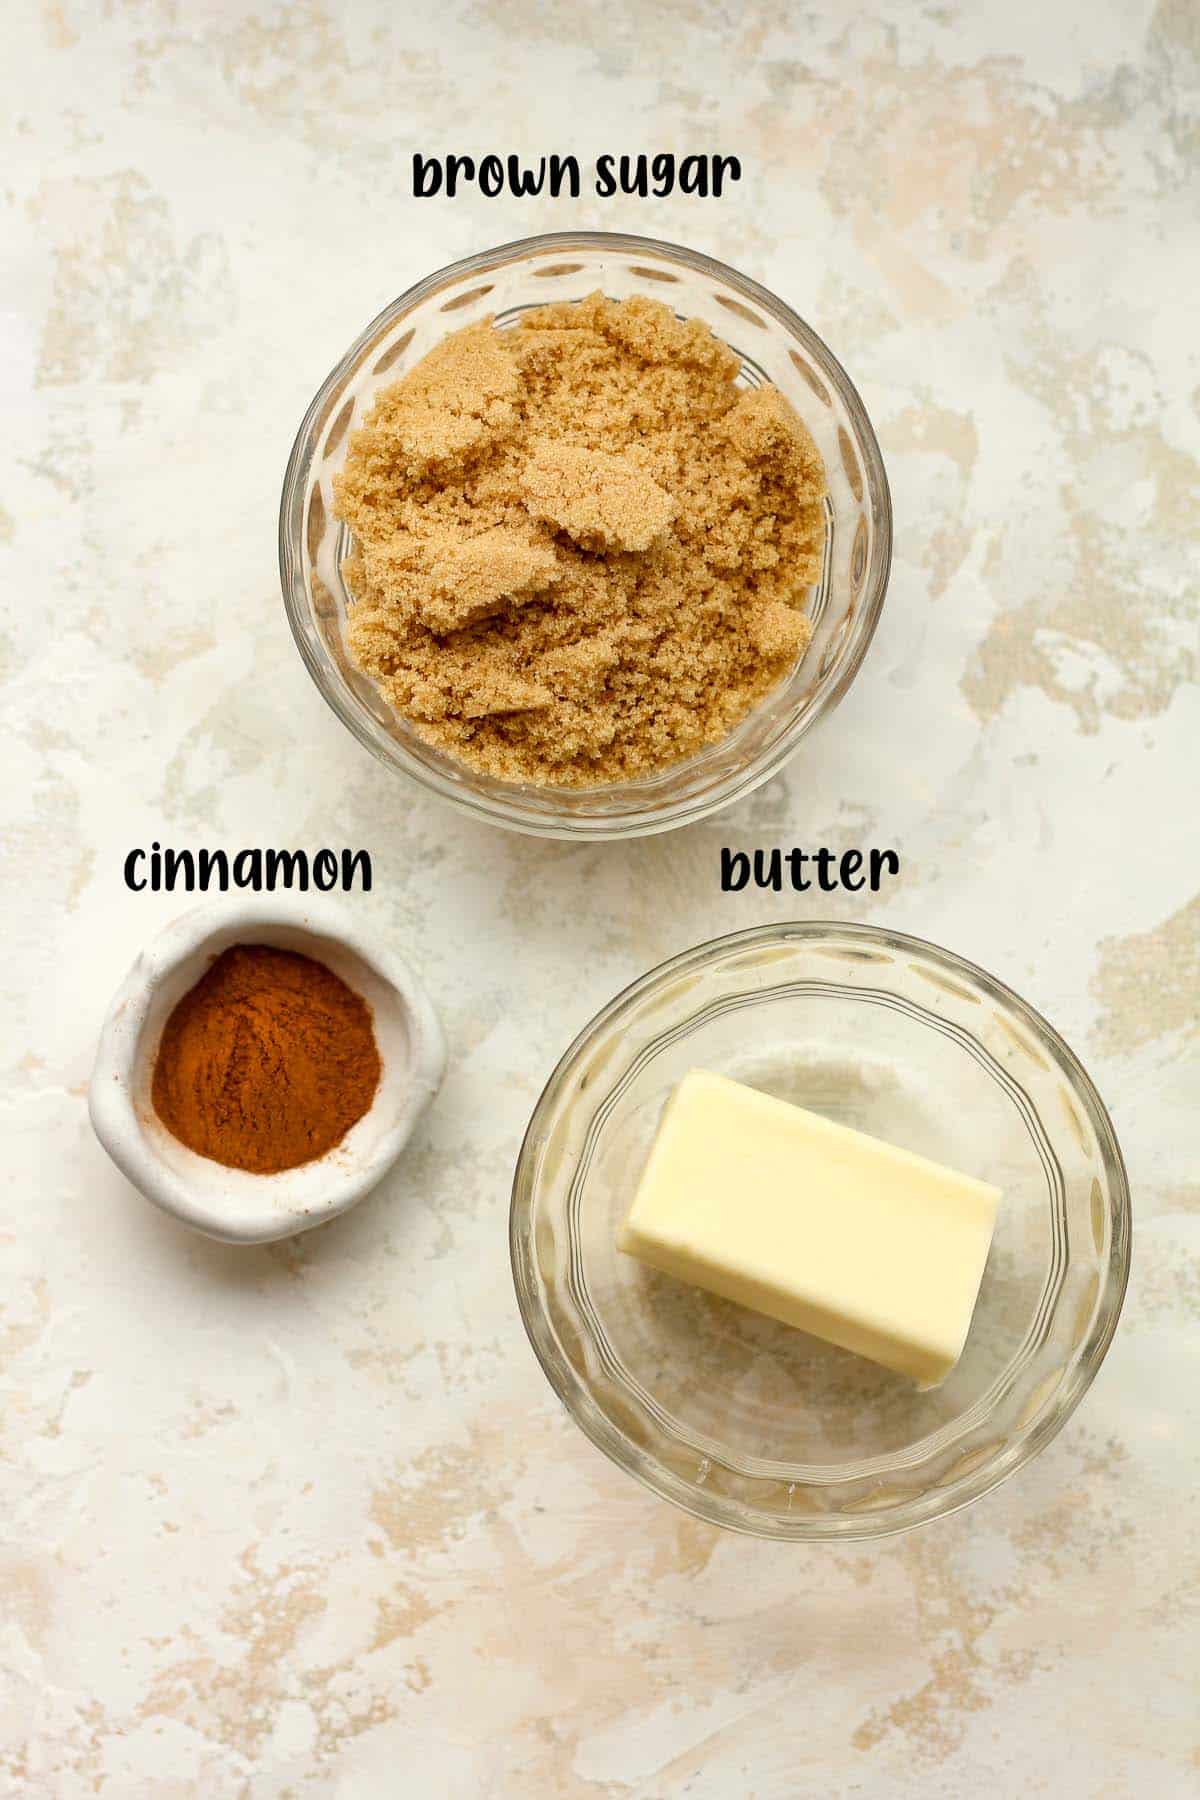 The labeled ingredients for the cinnamon filling.